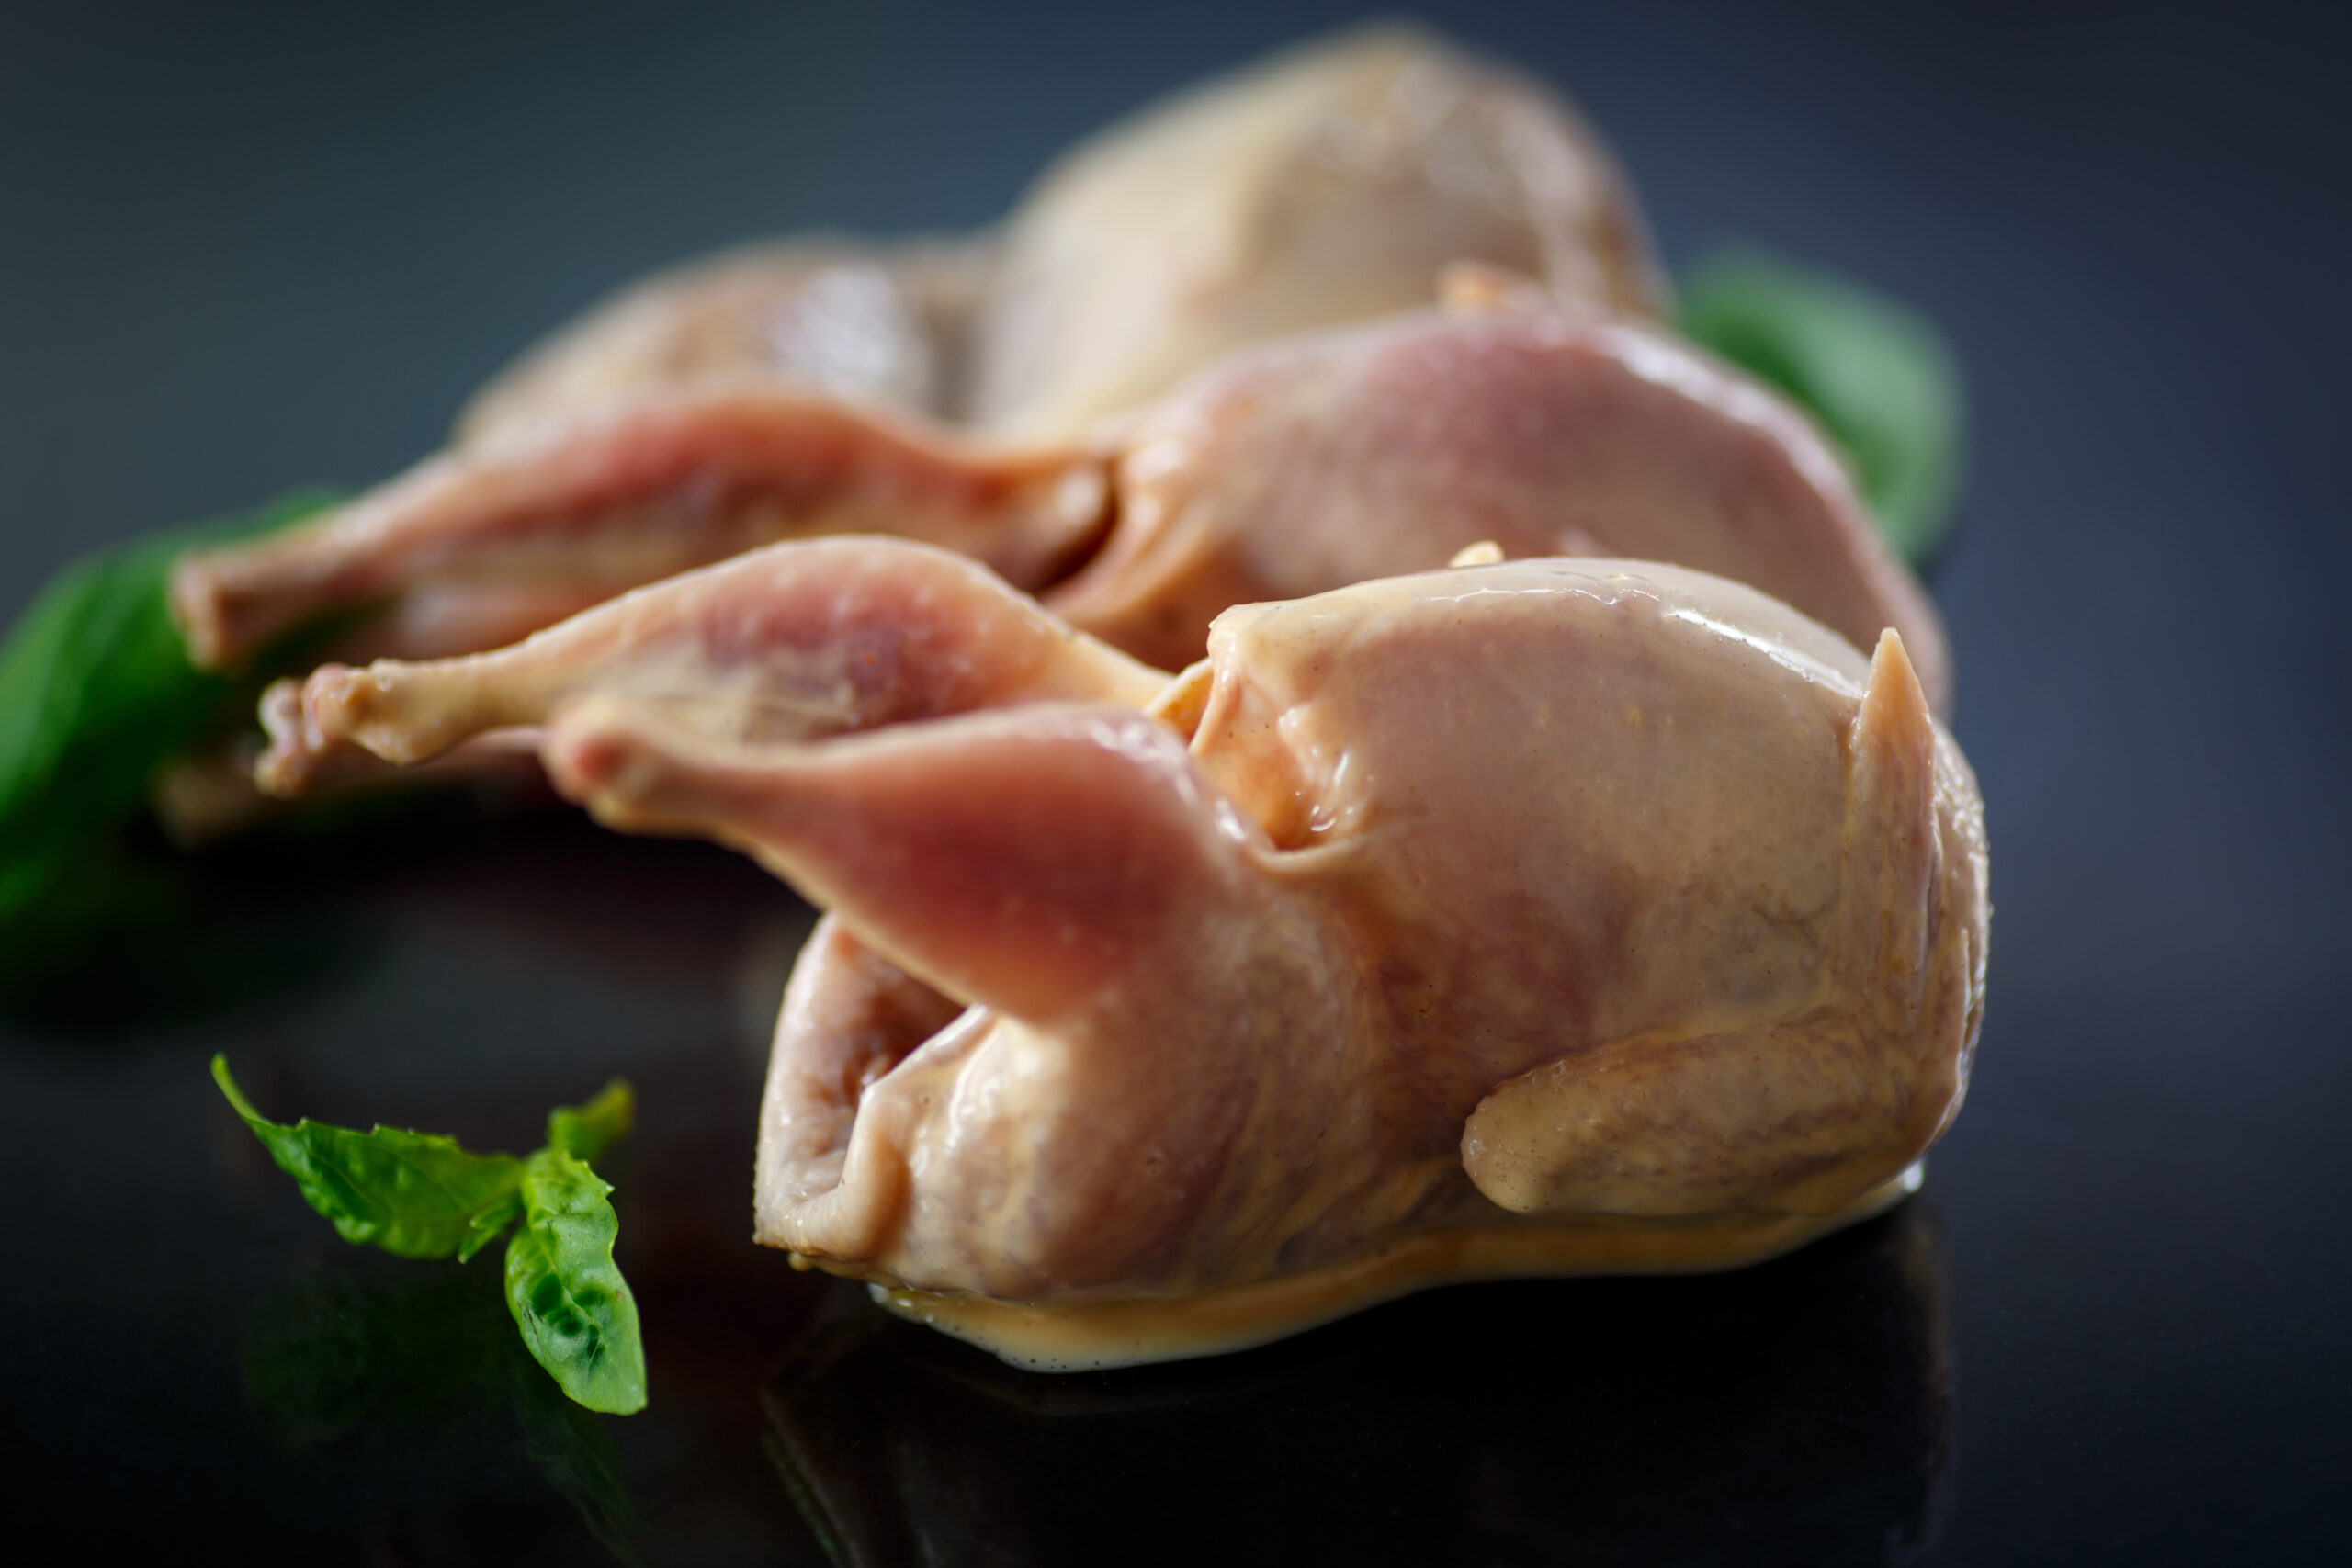 POULTRY CARCASSES